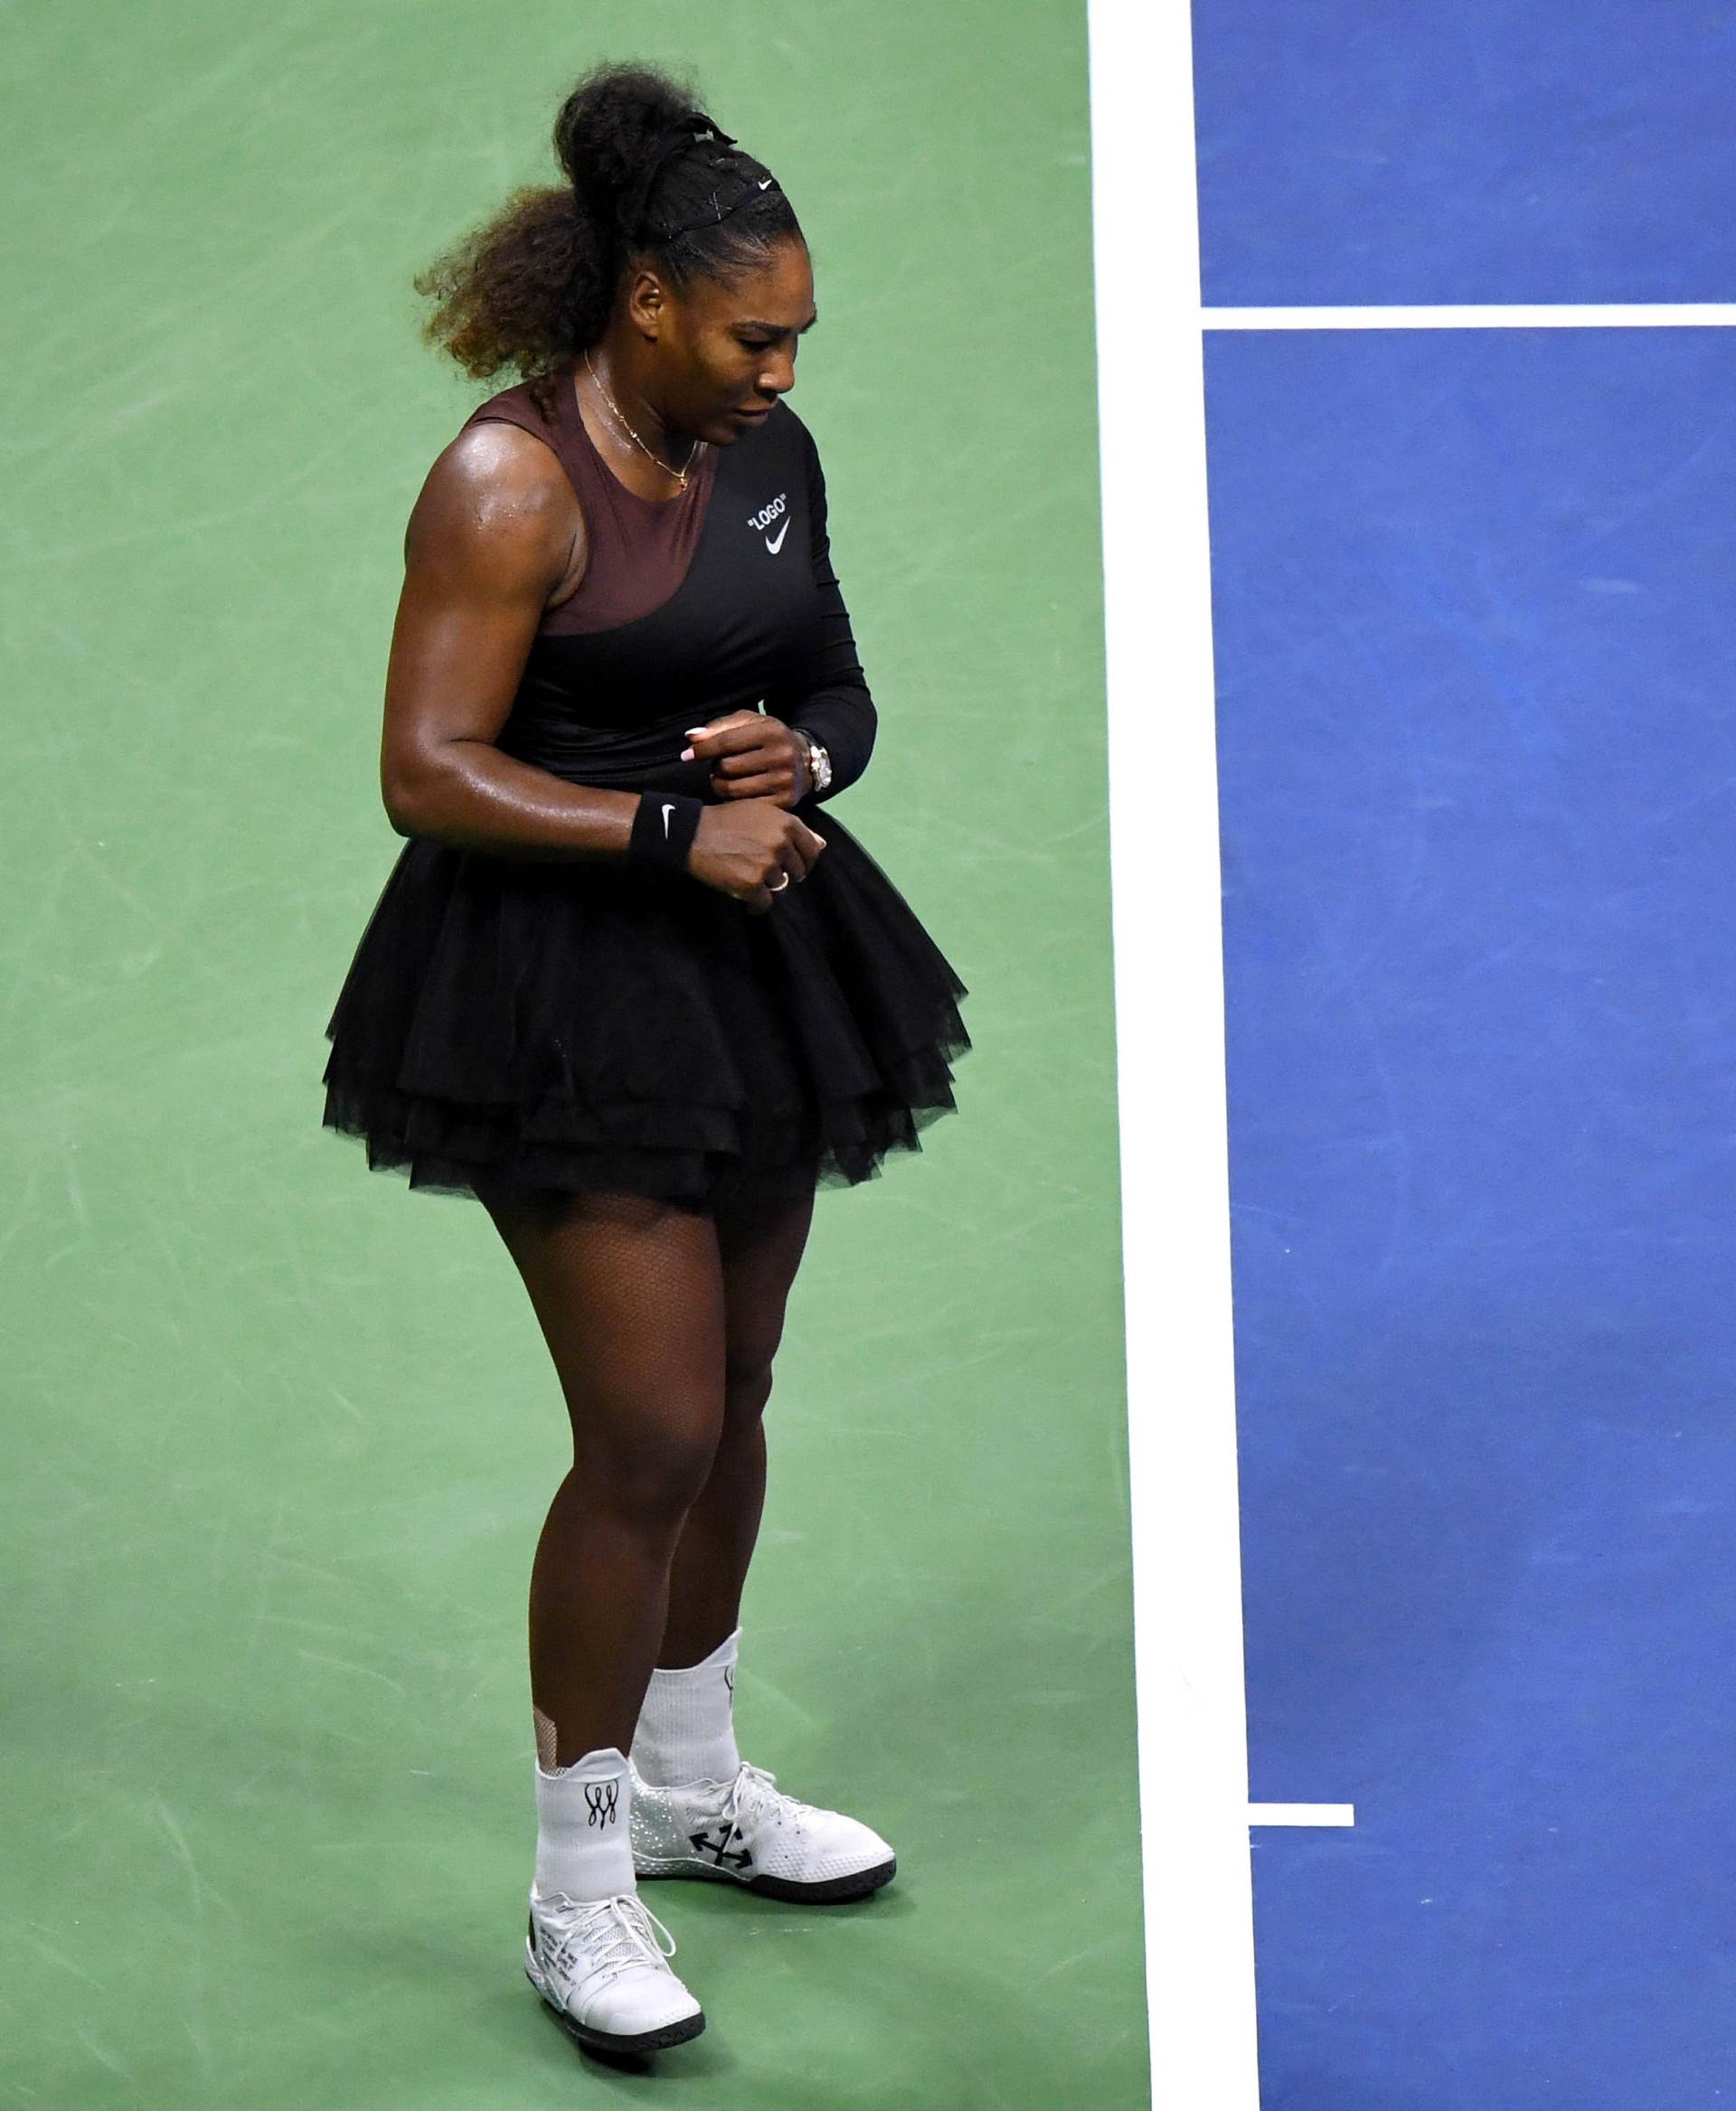 FILE PHOTO: Serena Williams of the United States smashes her racket on day thirteen of the 2018 U.S. Open tennis tournament in New York